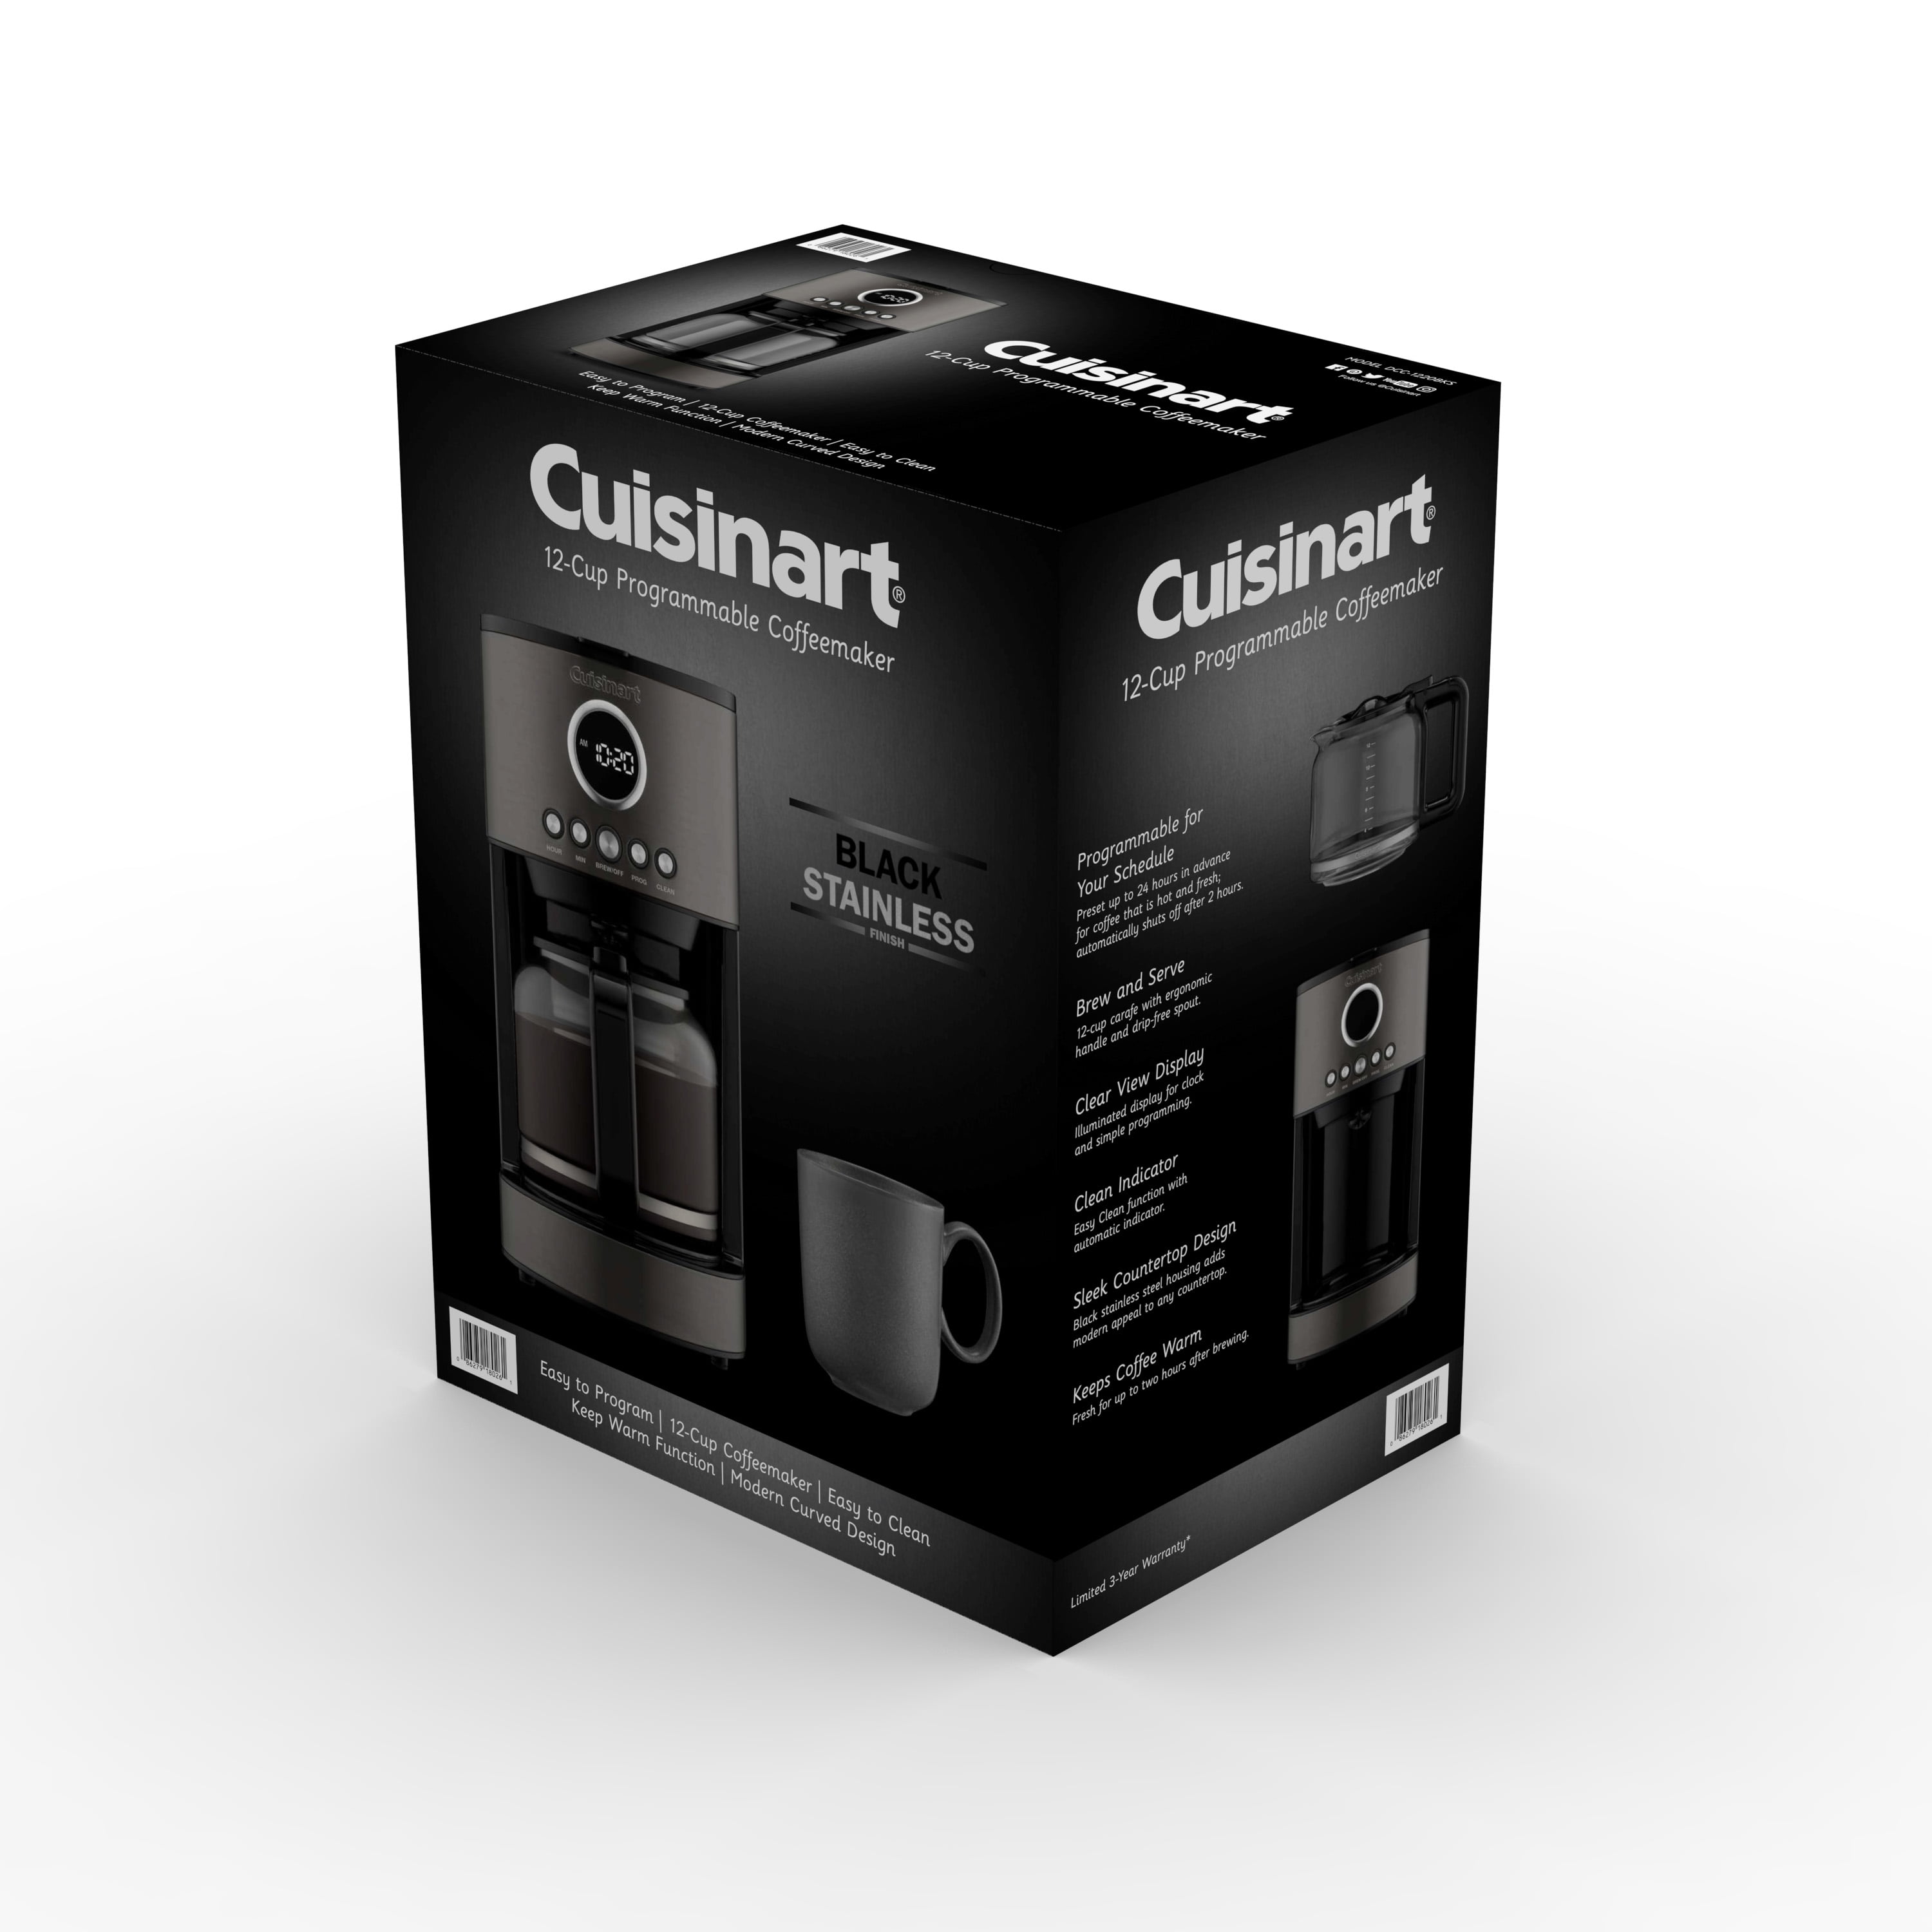 Cuisinart Grind & Brew 10-cup Automatic Coffee Maker DCC-690 Black &  Stainless